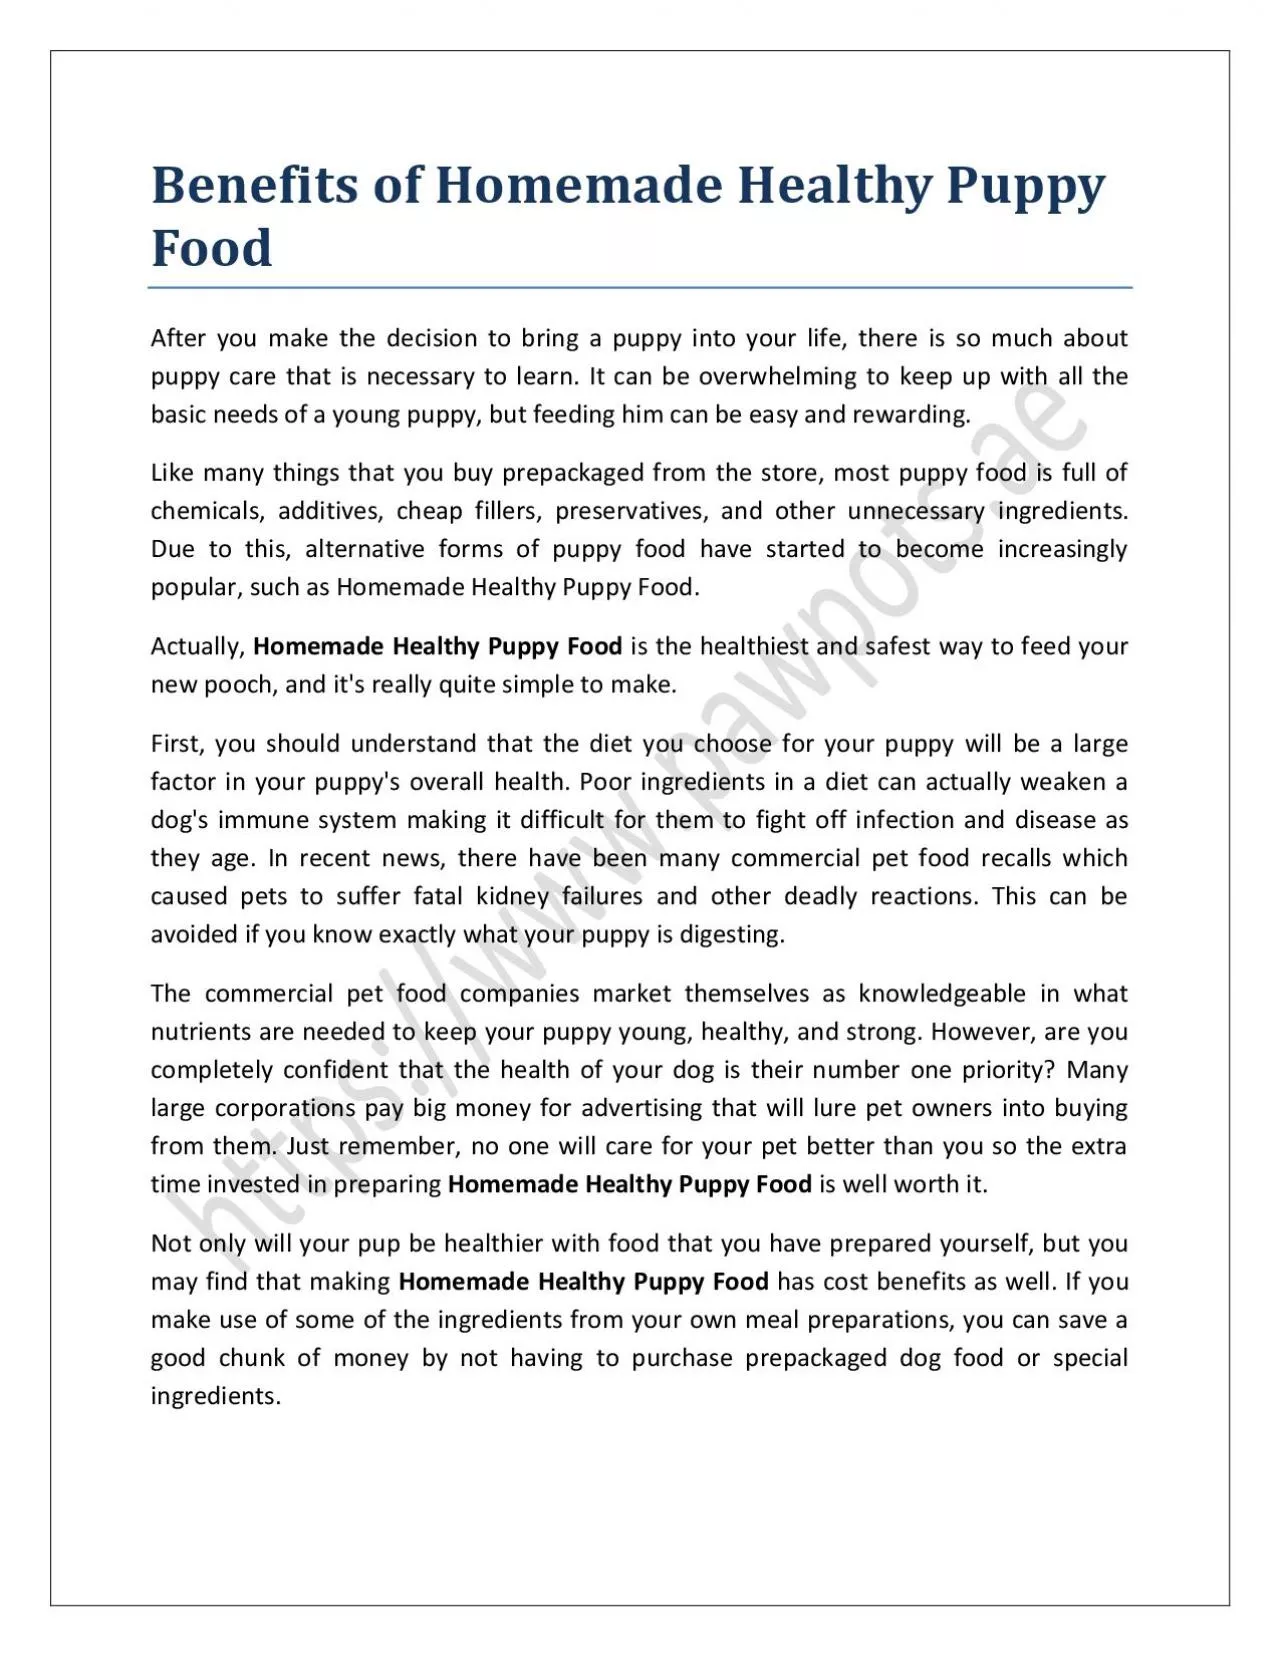 Benefits of Homemade Healthy Puppy Food